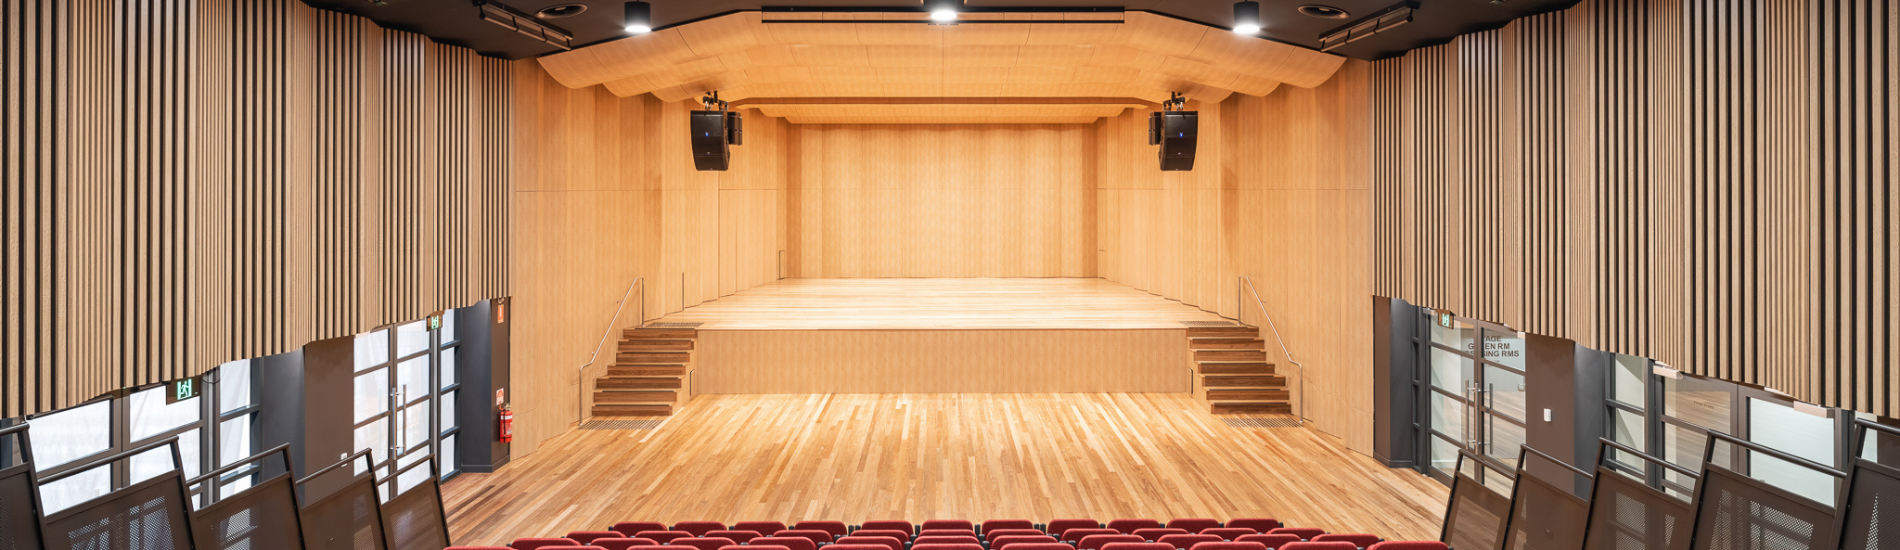 NBRS blend modern design with acoustic requirements for new auditorium project